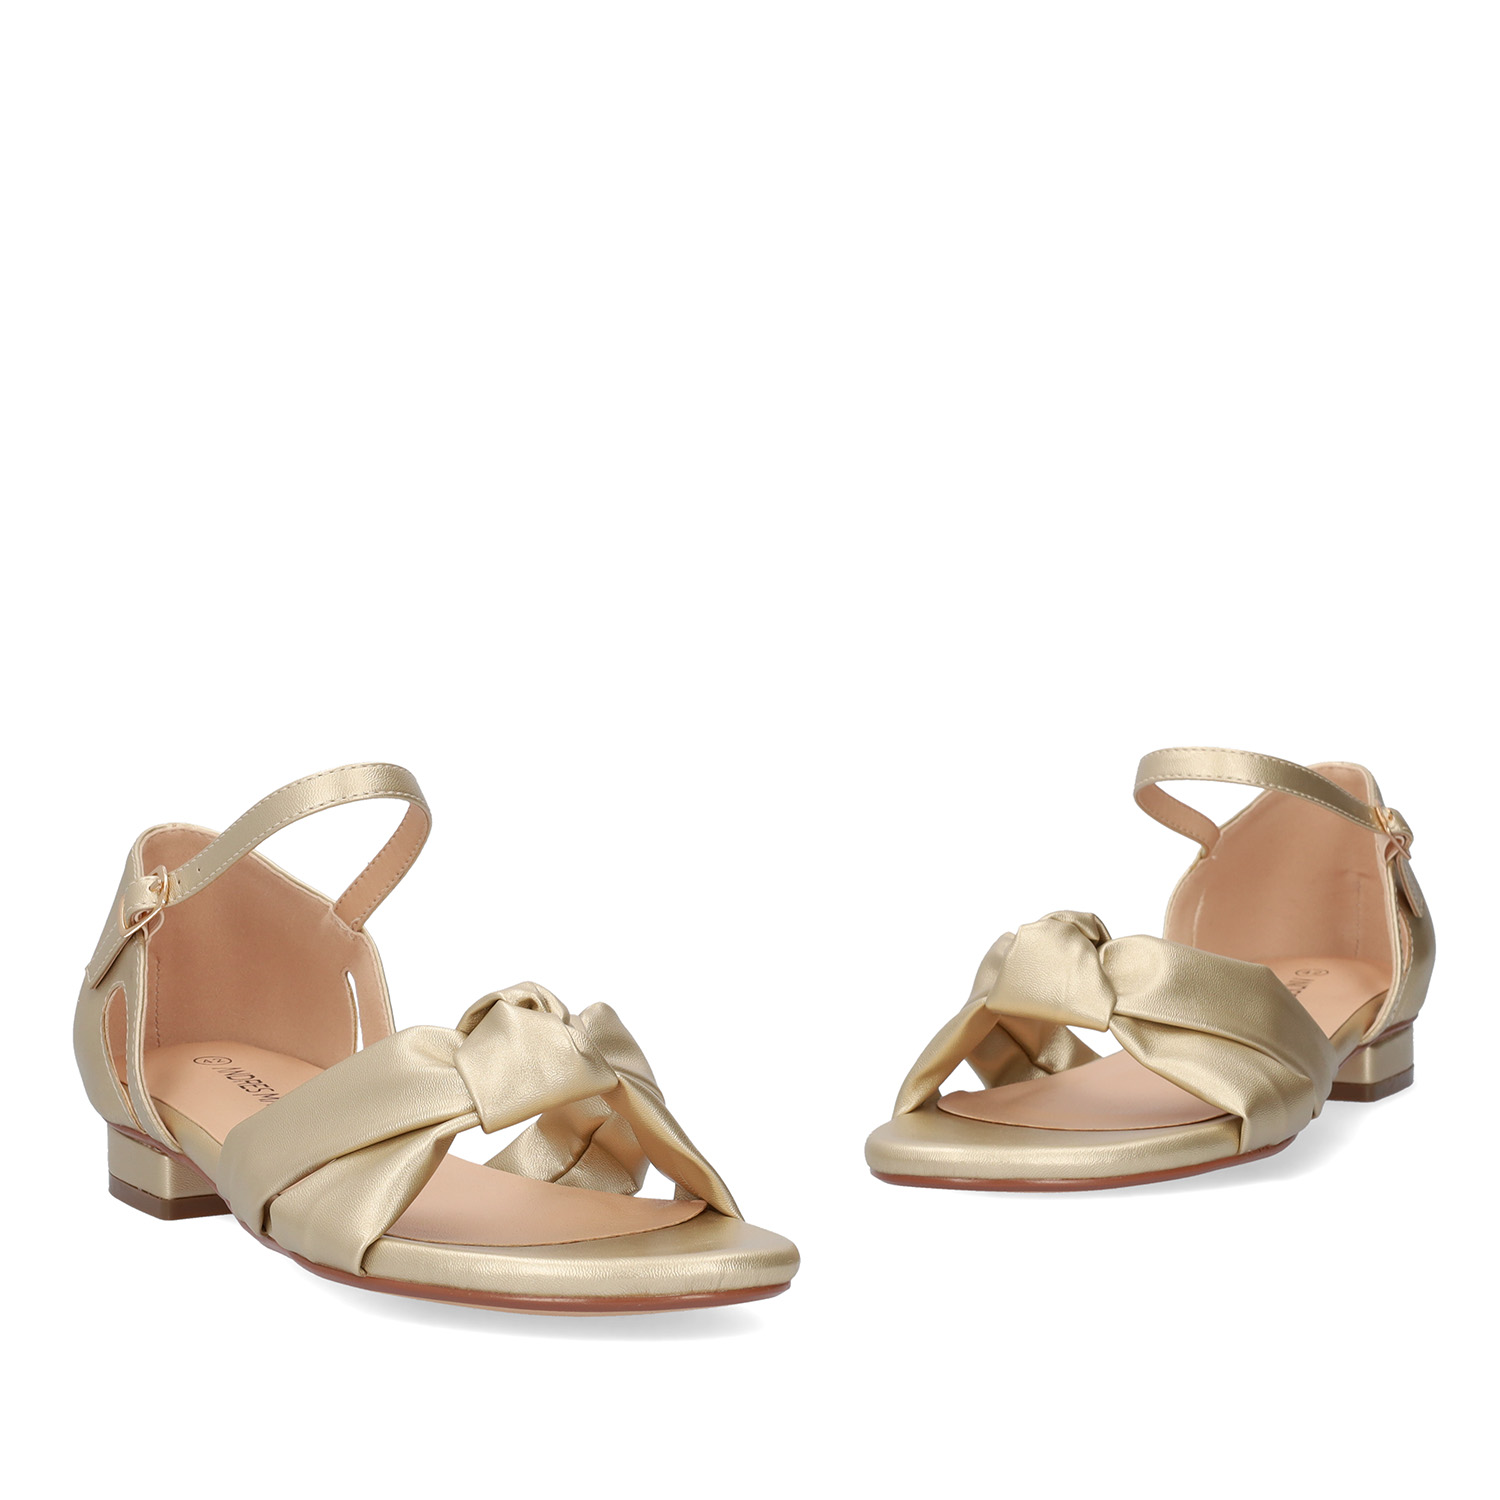 Flat sandals in soft golden colored material 